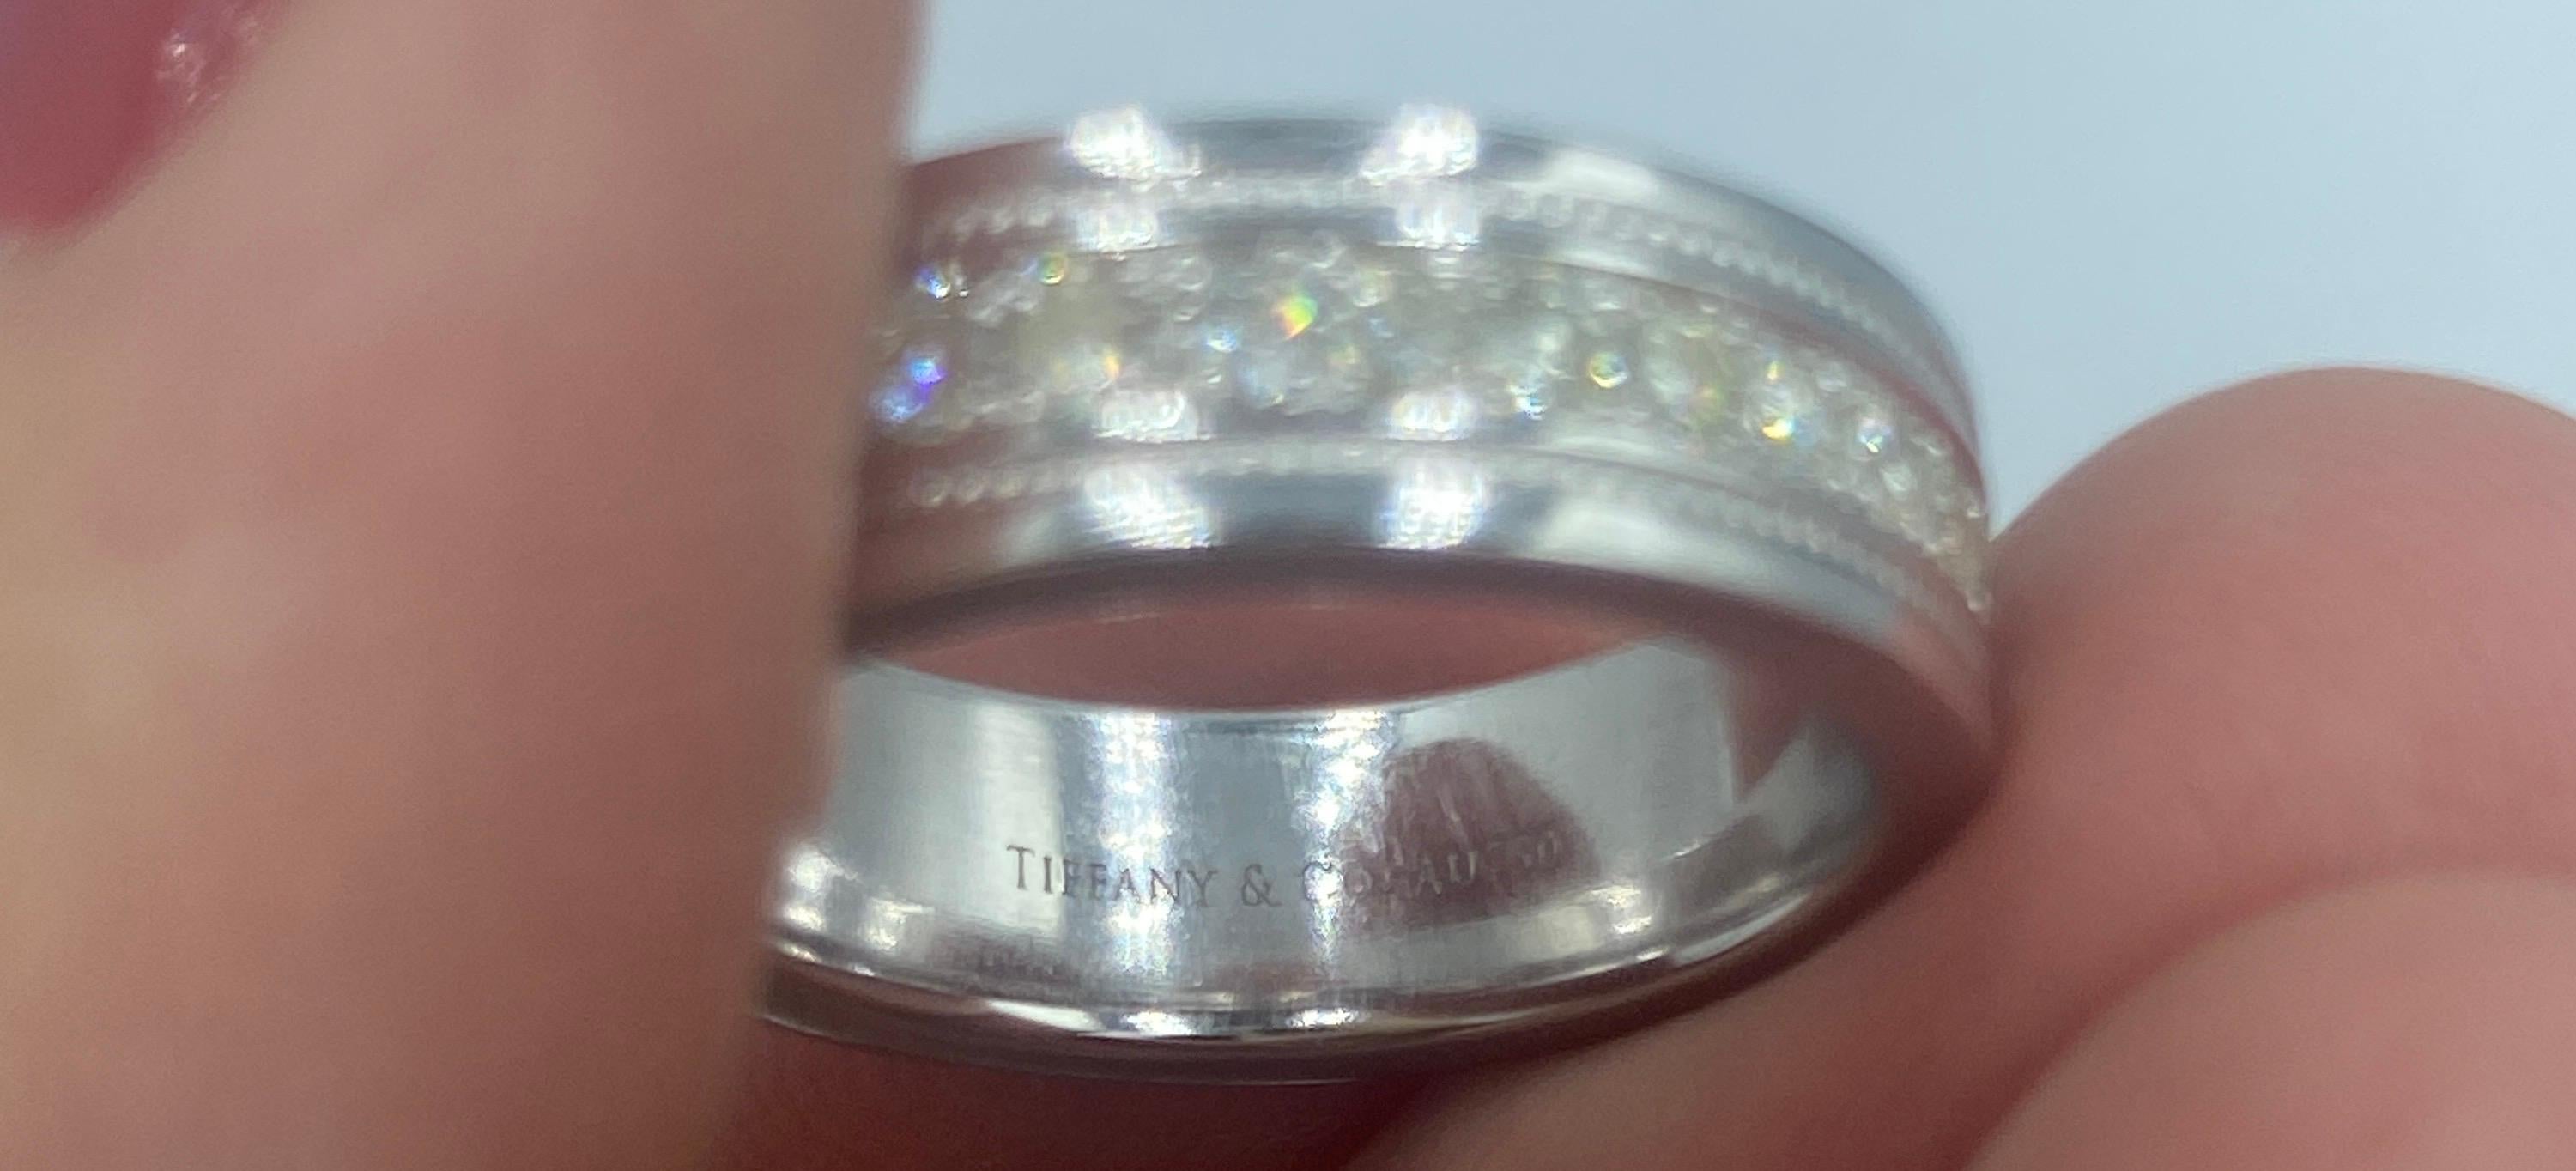 Tiffany & Co full circle 18k white gold diamond eternity ring In Excellent Condition For Sale In London, GB